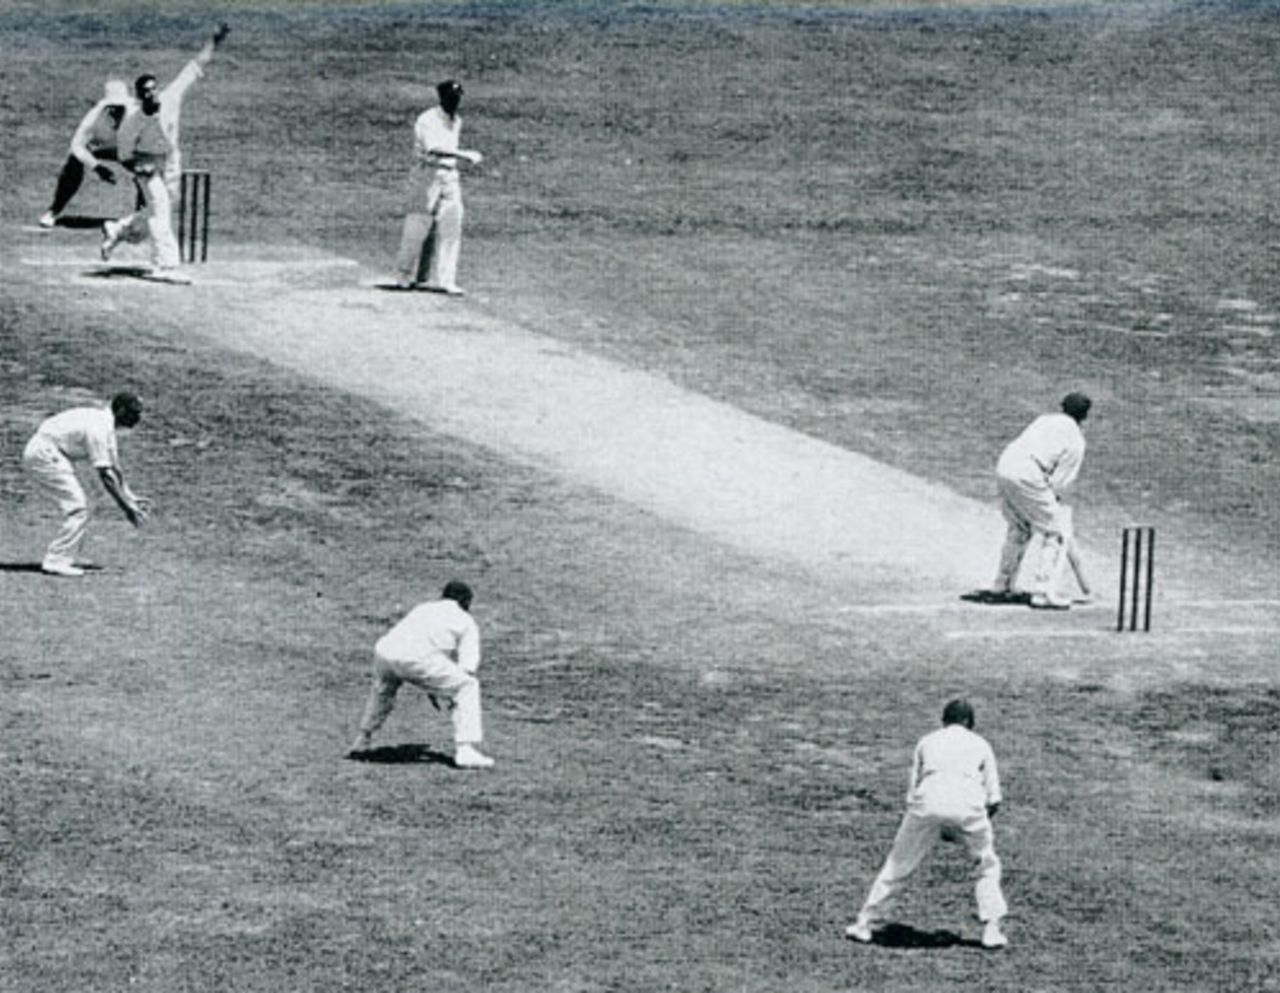 Bill Voce bowls to Bill Ponsford with a Bodyline field, Australia v England, 3rd Test, Adelaide, January 14, 1933